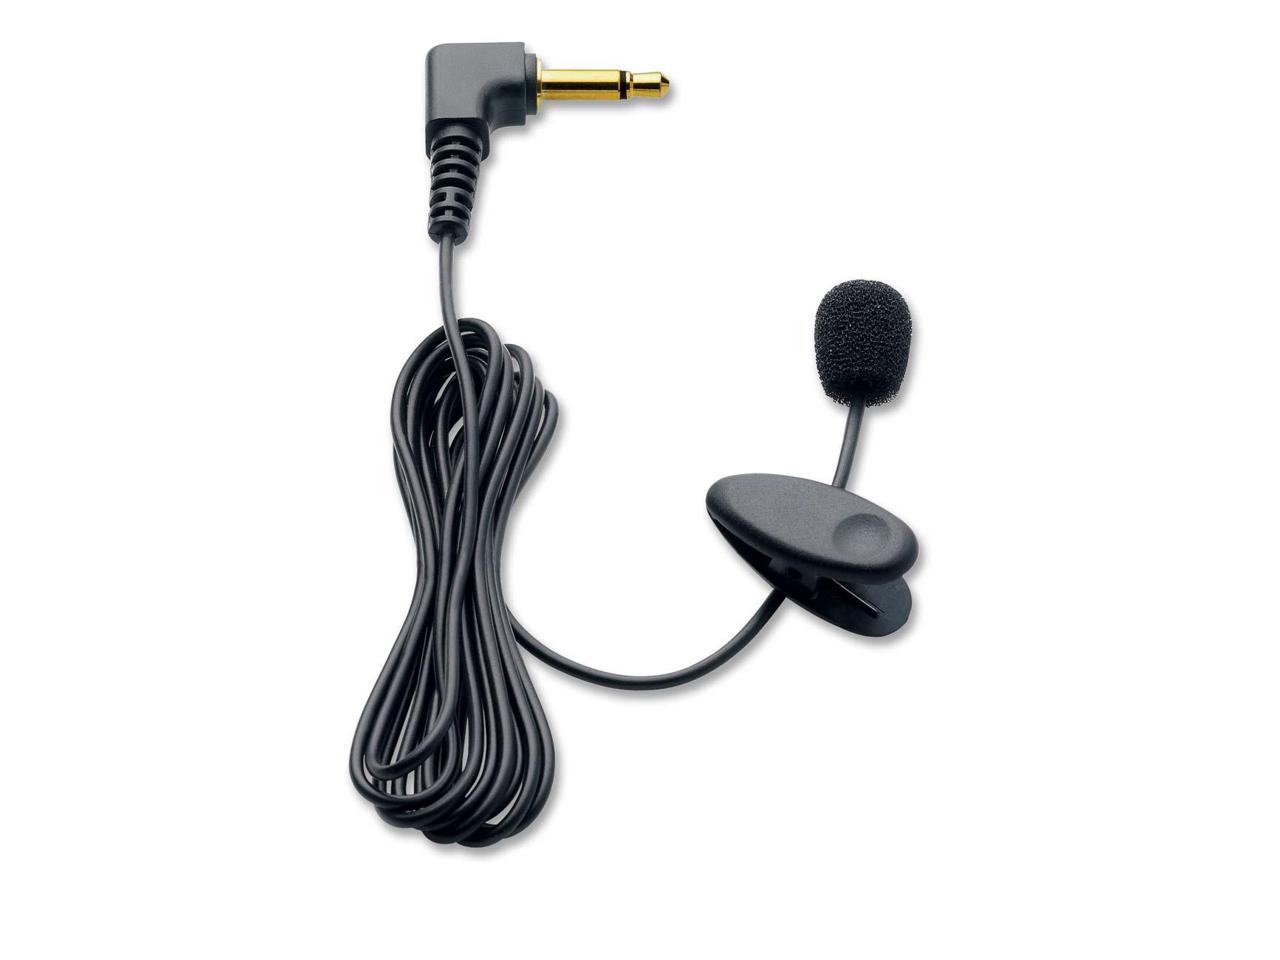 PHILIPS LFH9173/00 Black 3.5mm Connector Speech Tie/Collar Clip Microphone - image 1 of 2